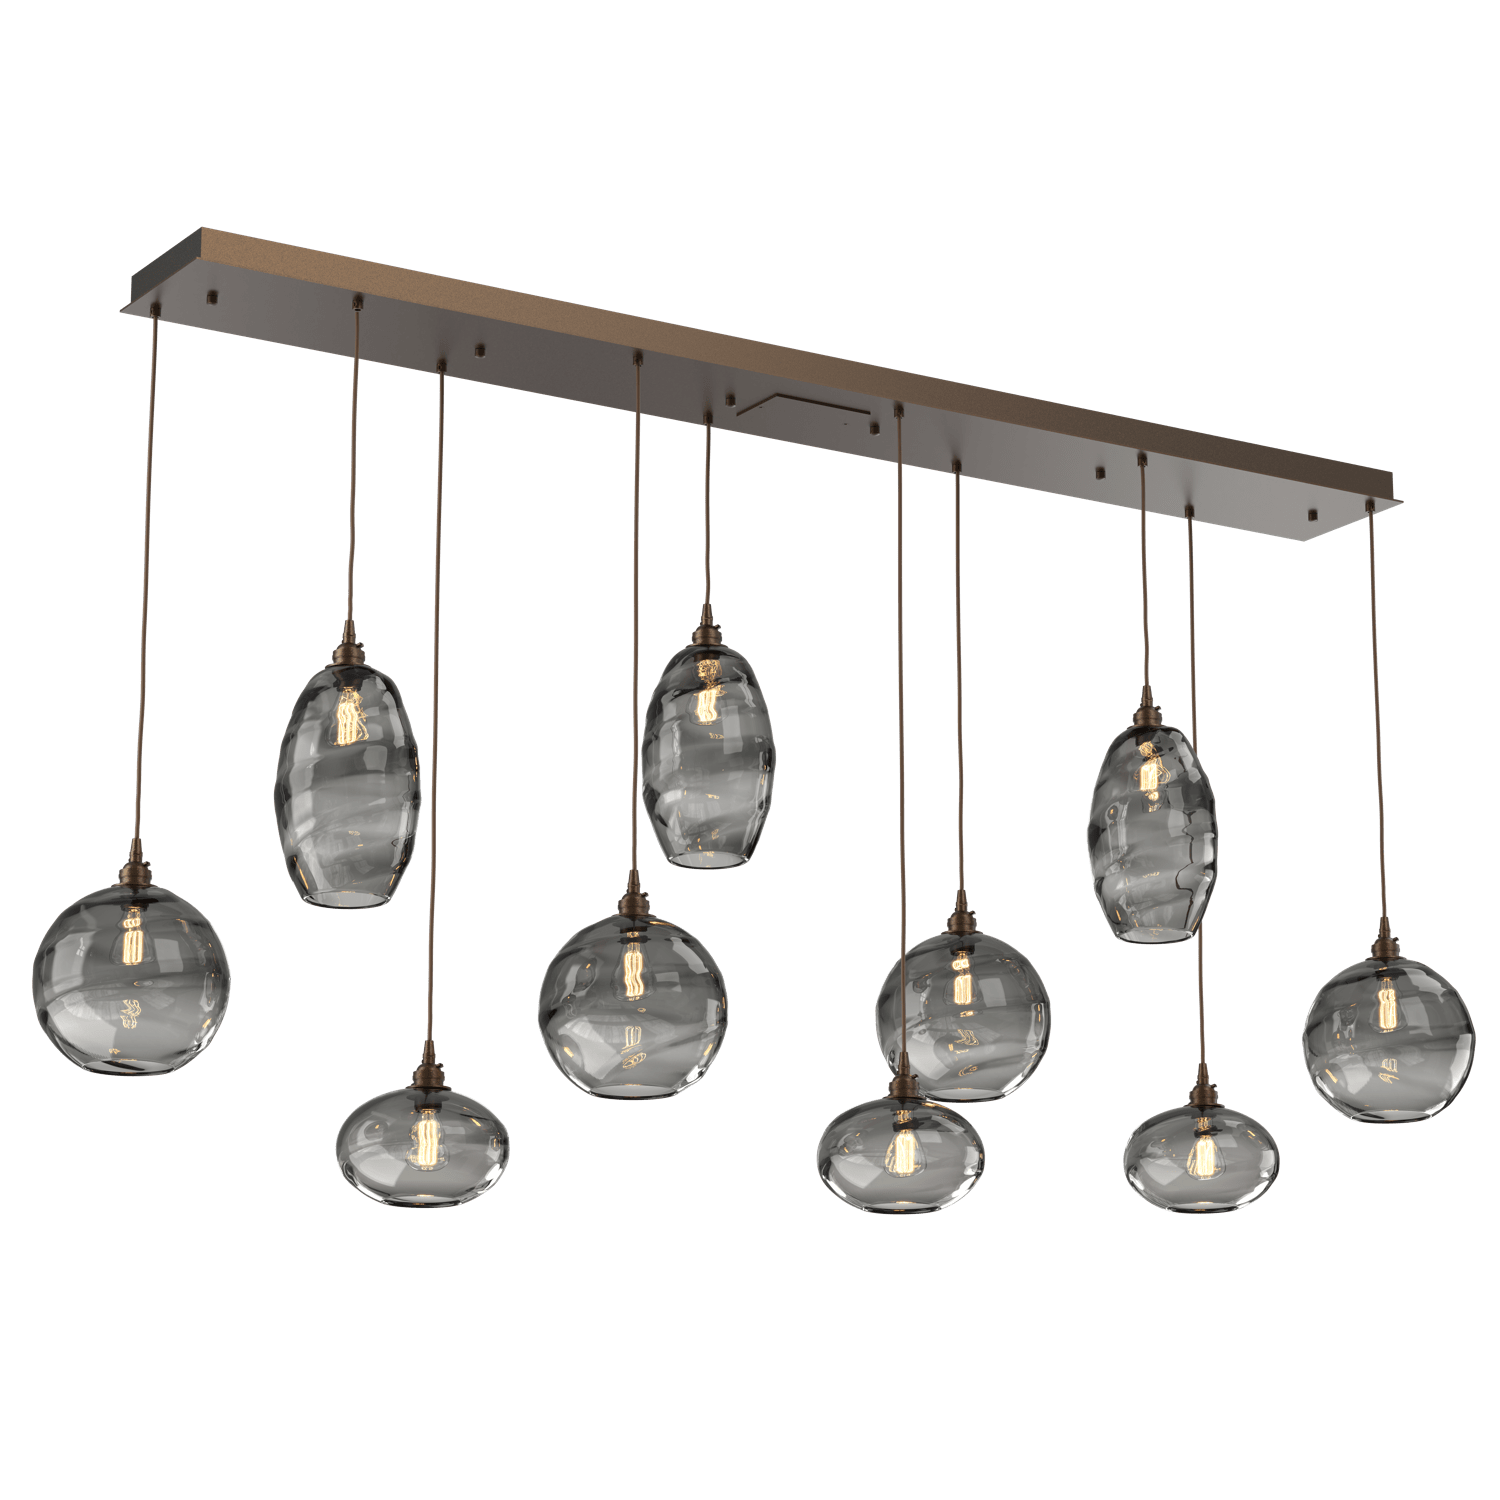 PLB0048-10-FB-OS-Hammerton-Studio-Optic-Blown-Glass-Misto-10-light-linear-pendant-chandelier-with-flat-bronze-finish-and-optic-smoke-blown-glass-shades-and-incandescent-lamping